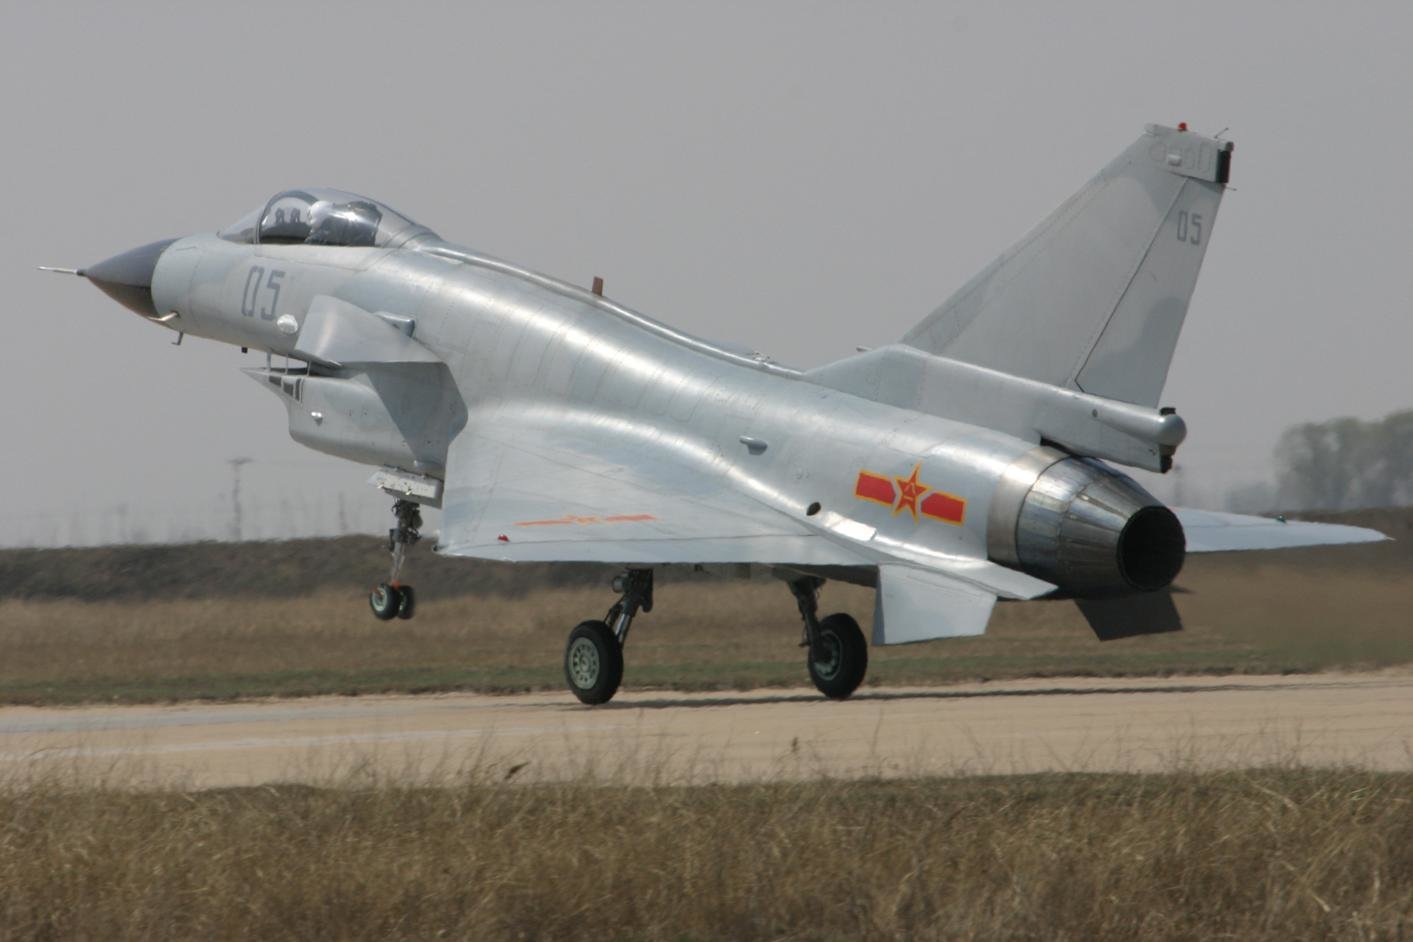 A Chengdu J-10 fighter of the People’s Liberation Army Air Force. Photo by mxiong via Wikimedia Commons.